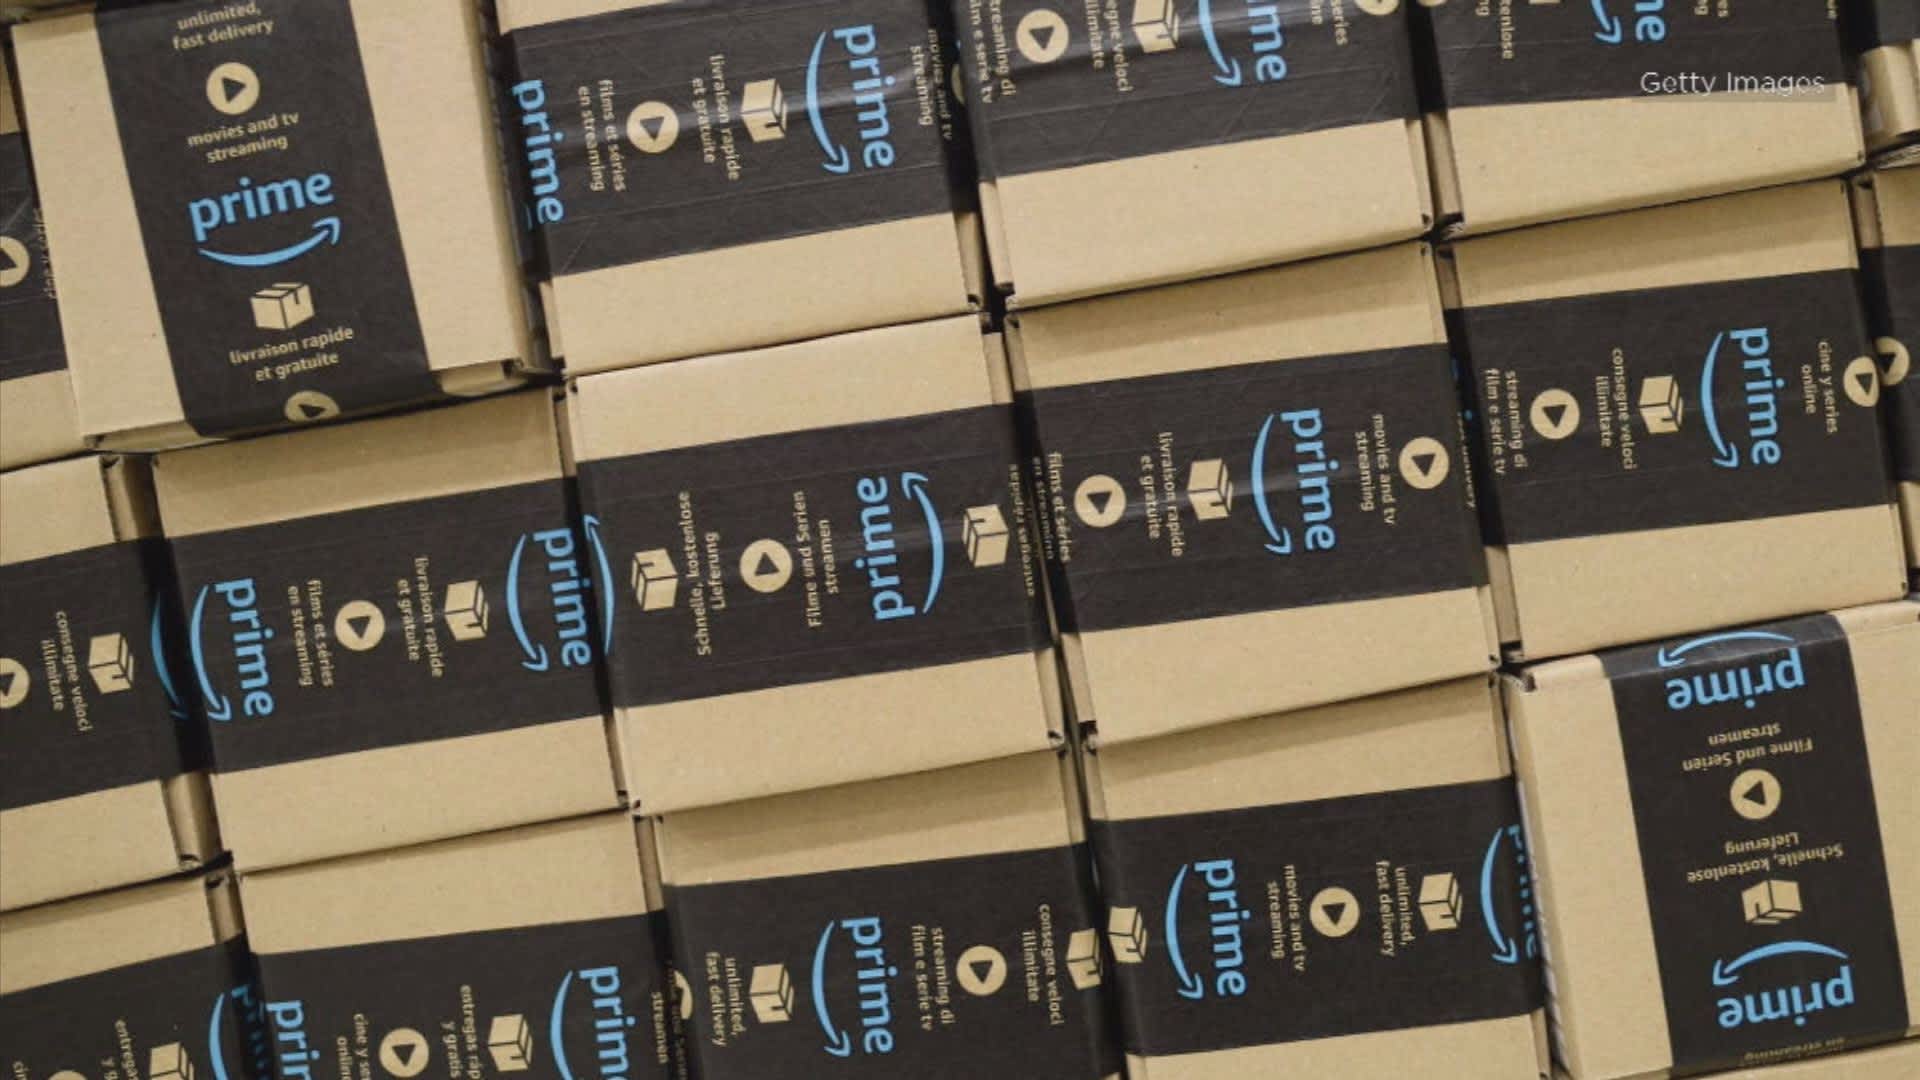 Amazon Prime growth is slowing down in the U.S., says